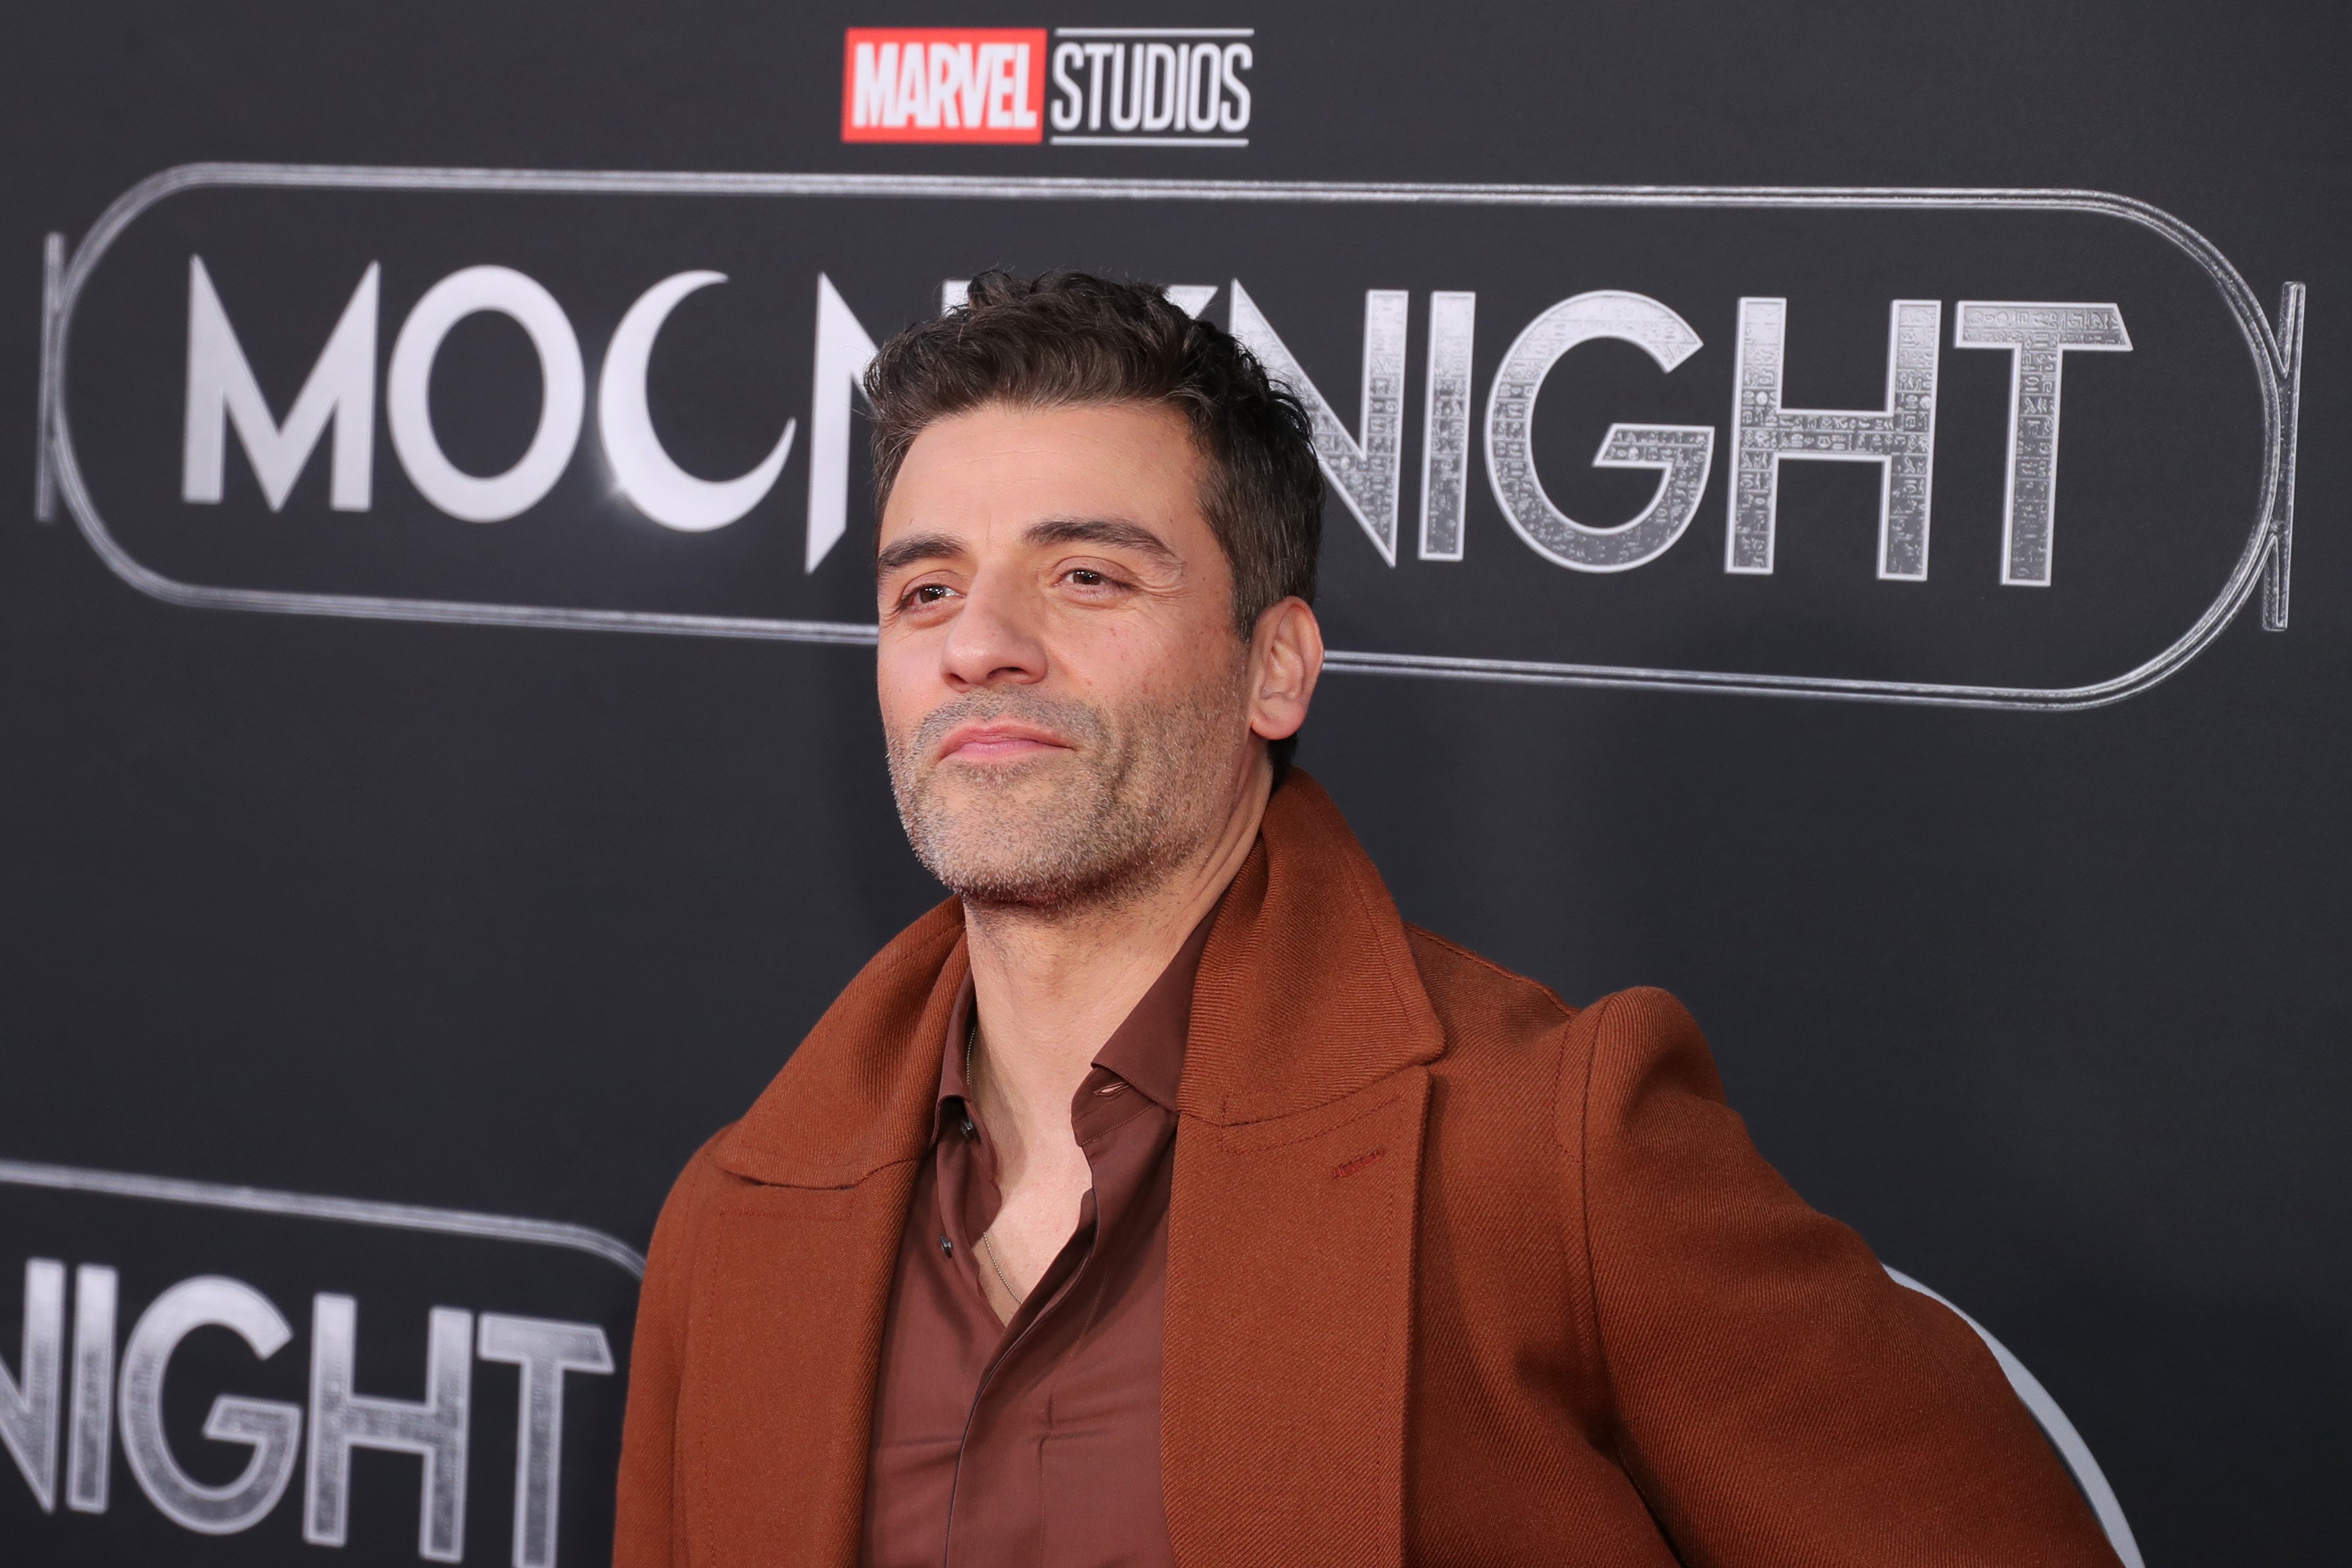 Dune actor Oscar Isaac attends the premiere of Marvel's Moon Knight